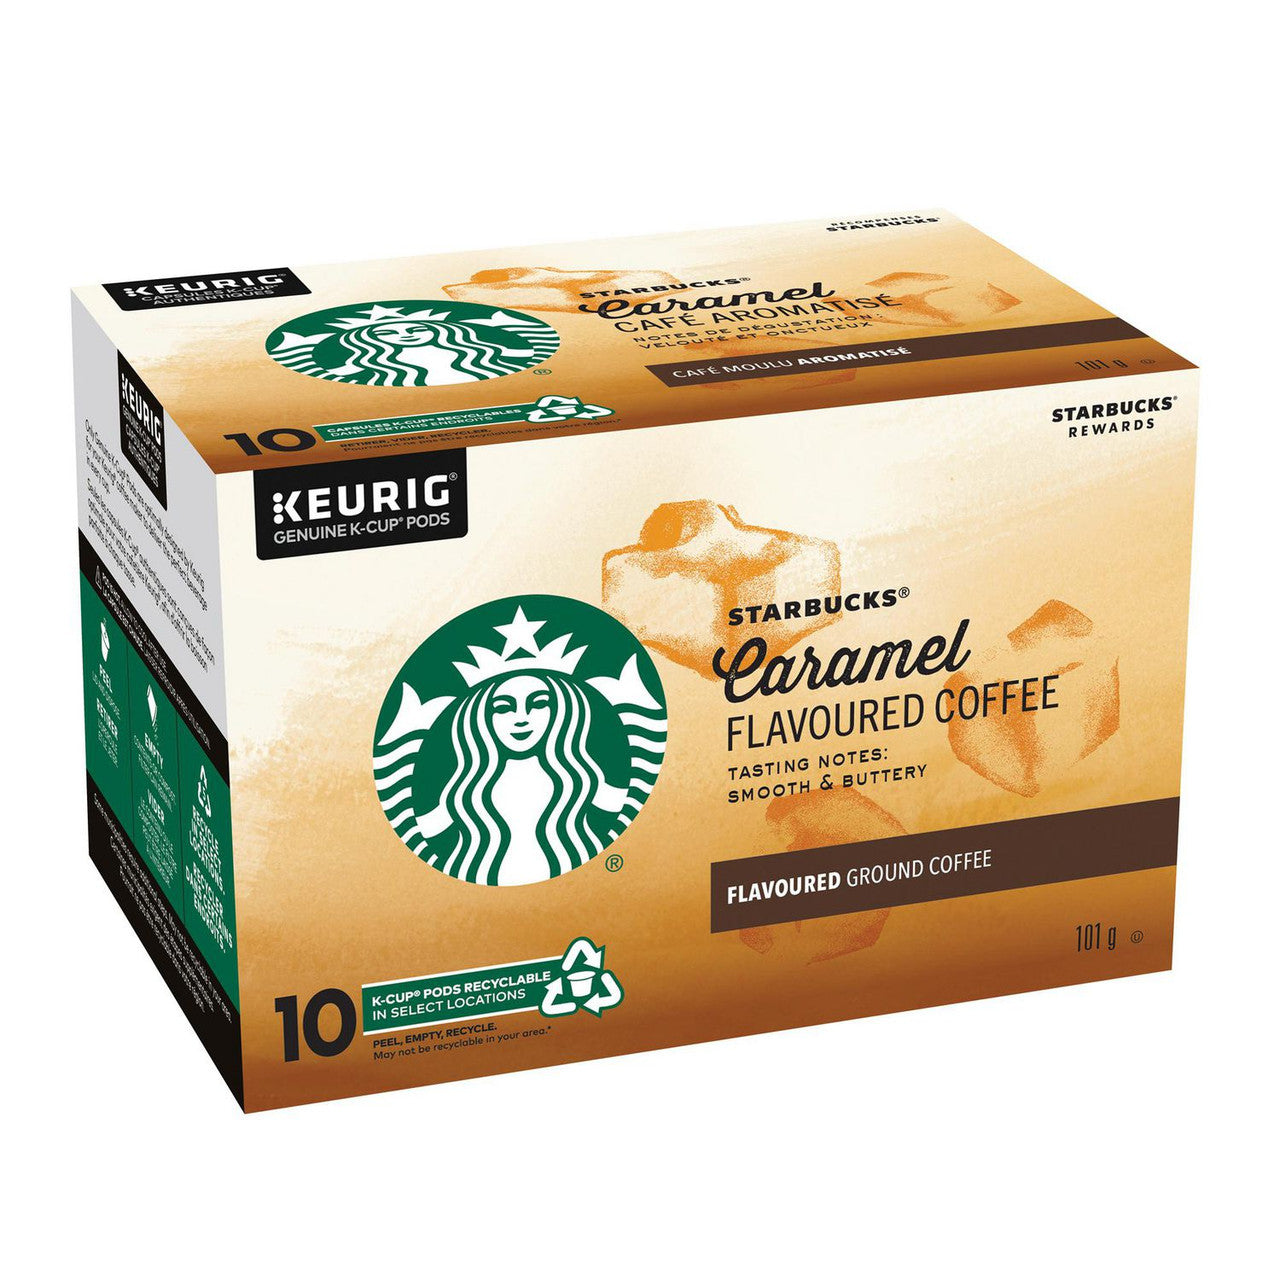 Starbucks Caramel Flavored Coffee K-Cup 10ct, 101g/3.5 oz. (Imported from Canada)